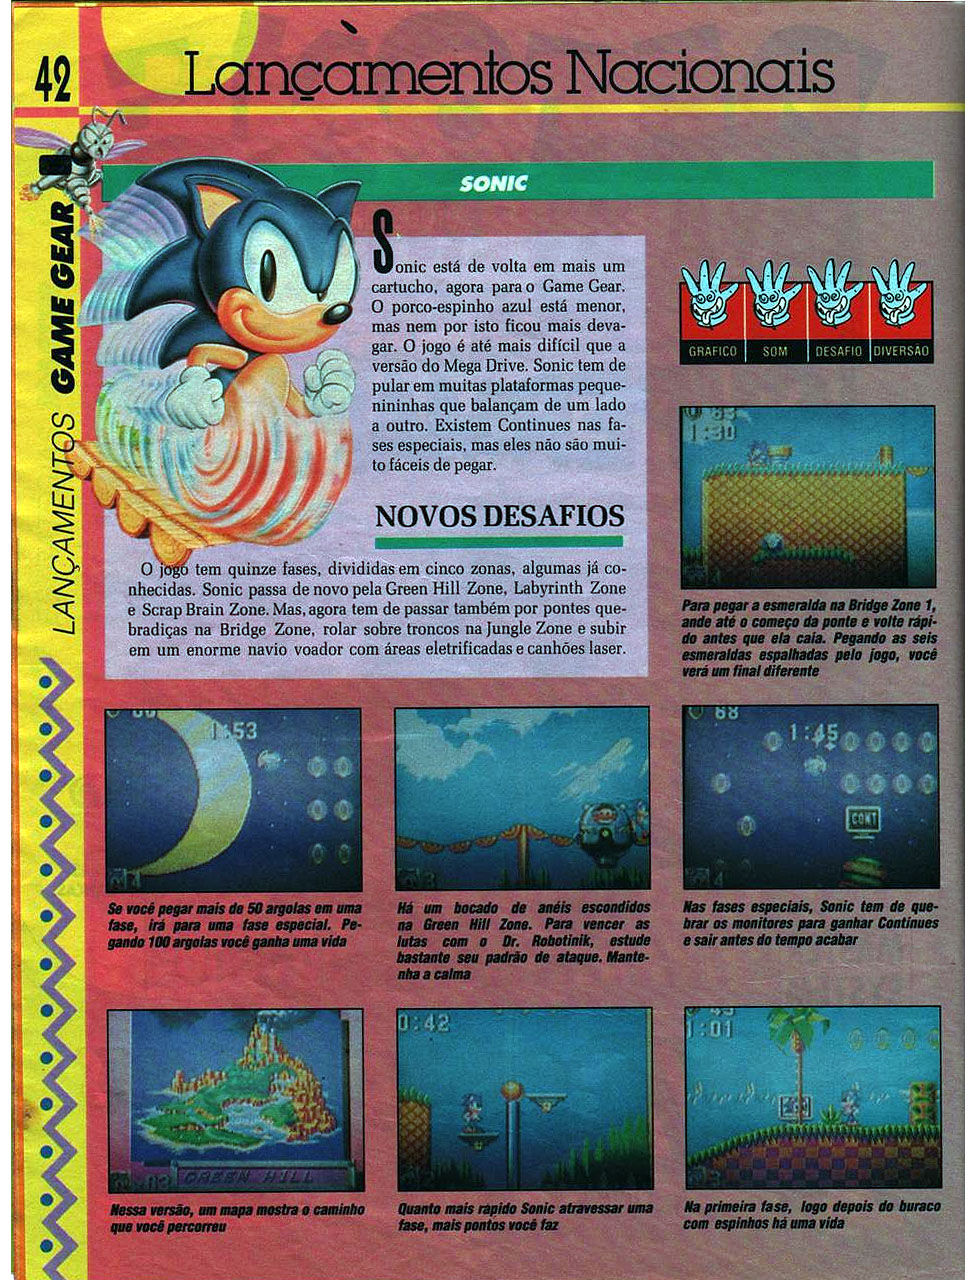 Sonic Scanner. Sonic category